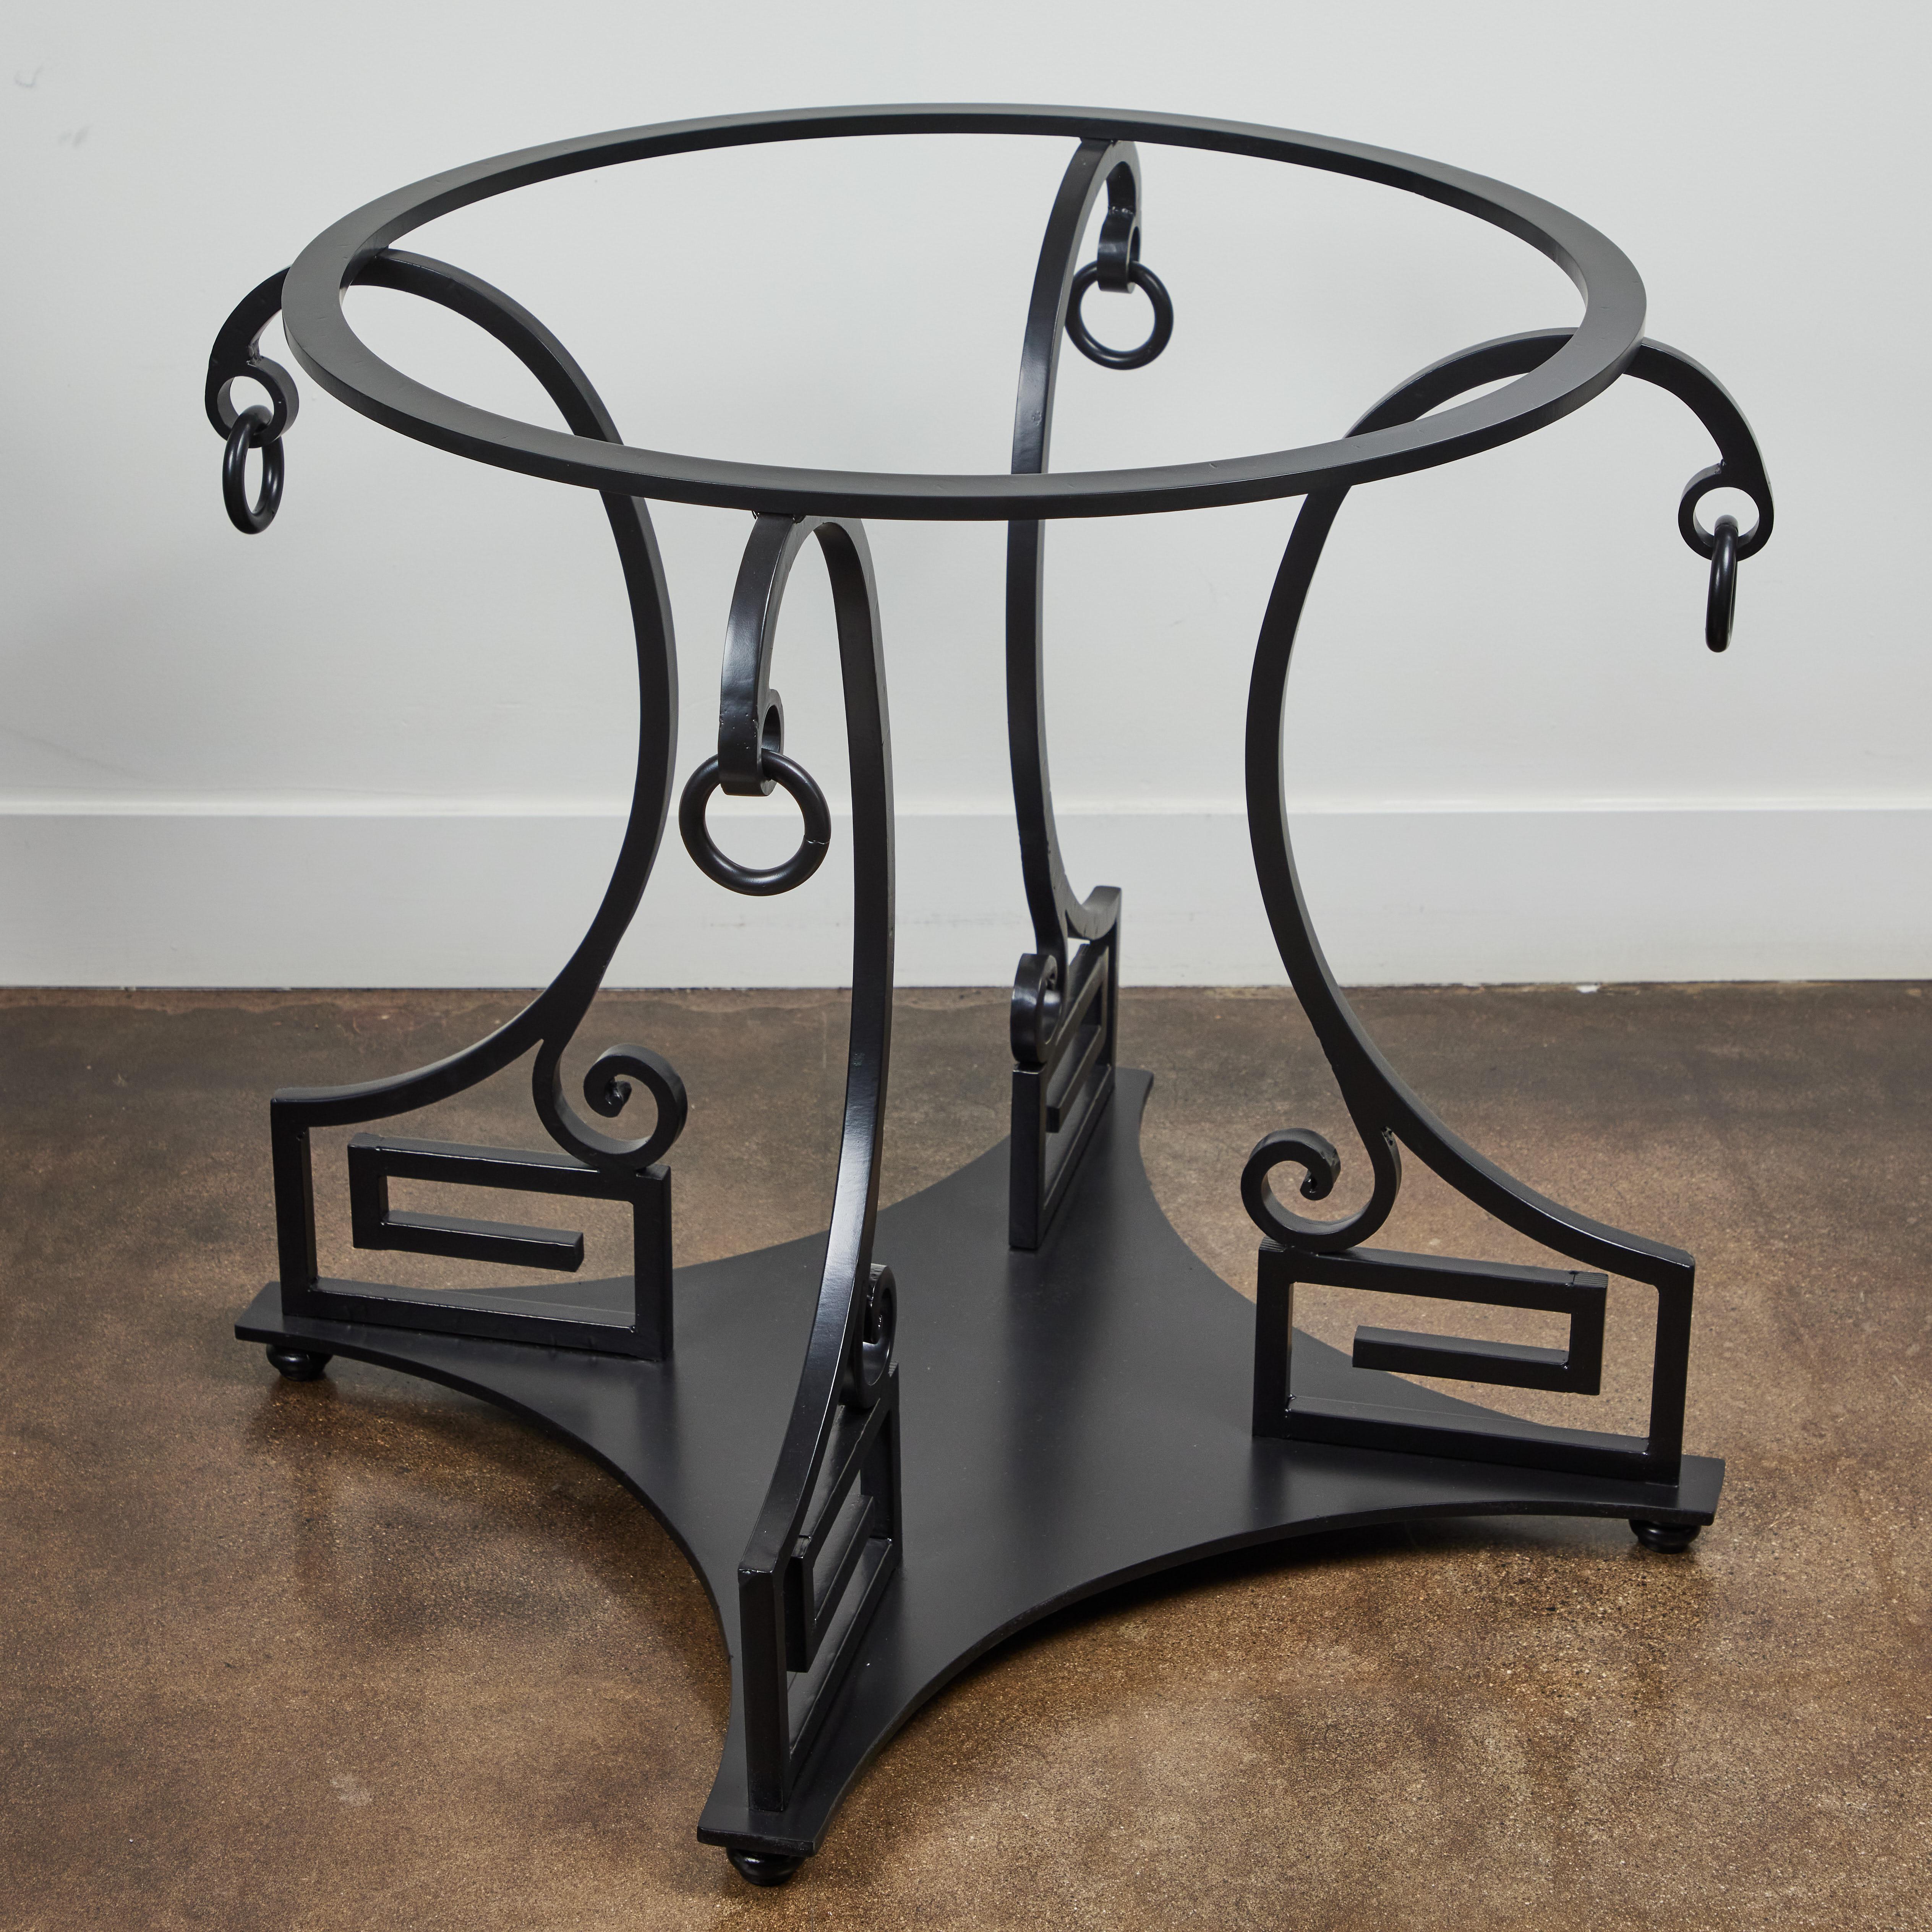 Timeless classicism, a beautiful Neoclassic style, Greek key table of wrought iron, early 20th century. The table could be used as either a center table or smaller scale dining table.